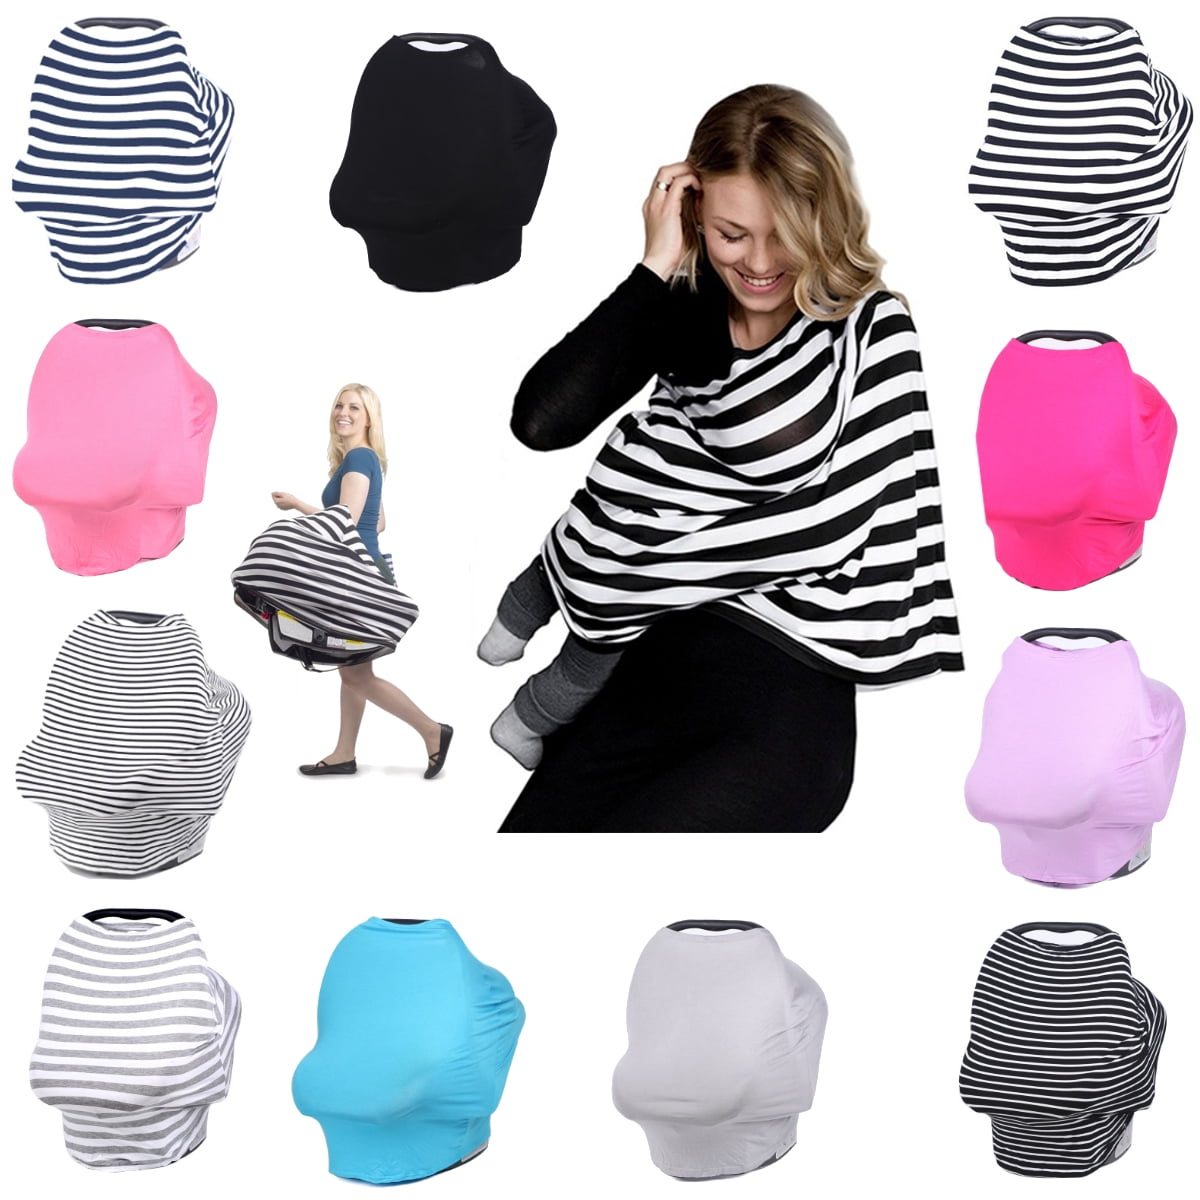 Breastfeeding Cover Shopping for Infant Car Seat Canopy Nursing Cover Scarf 